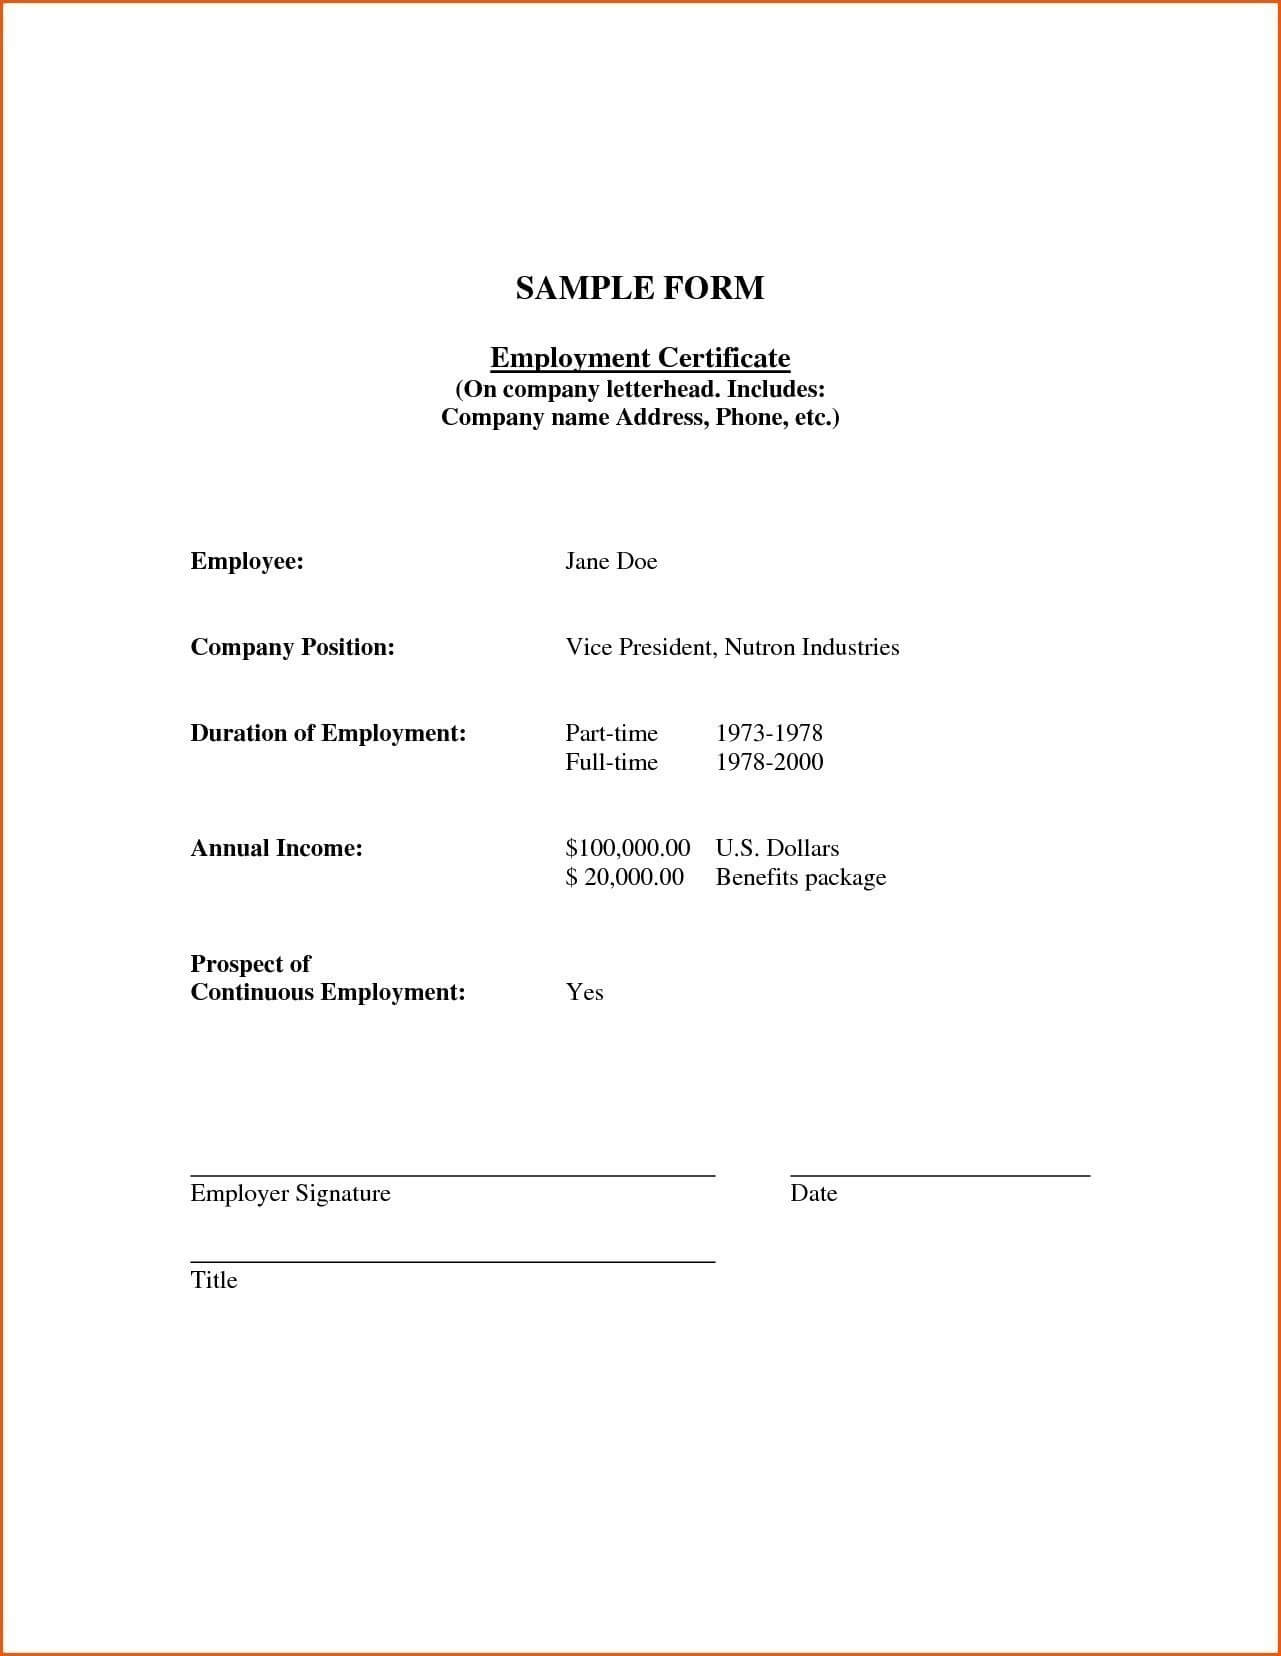 Letter Sample Certificate Of Employment Calep midnightpig co With